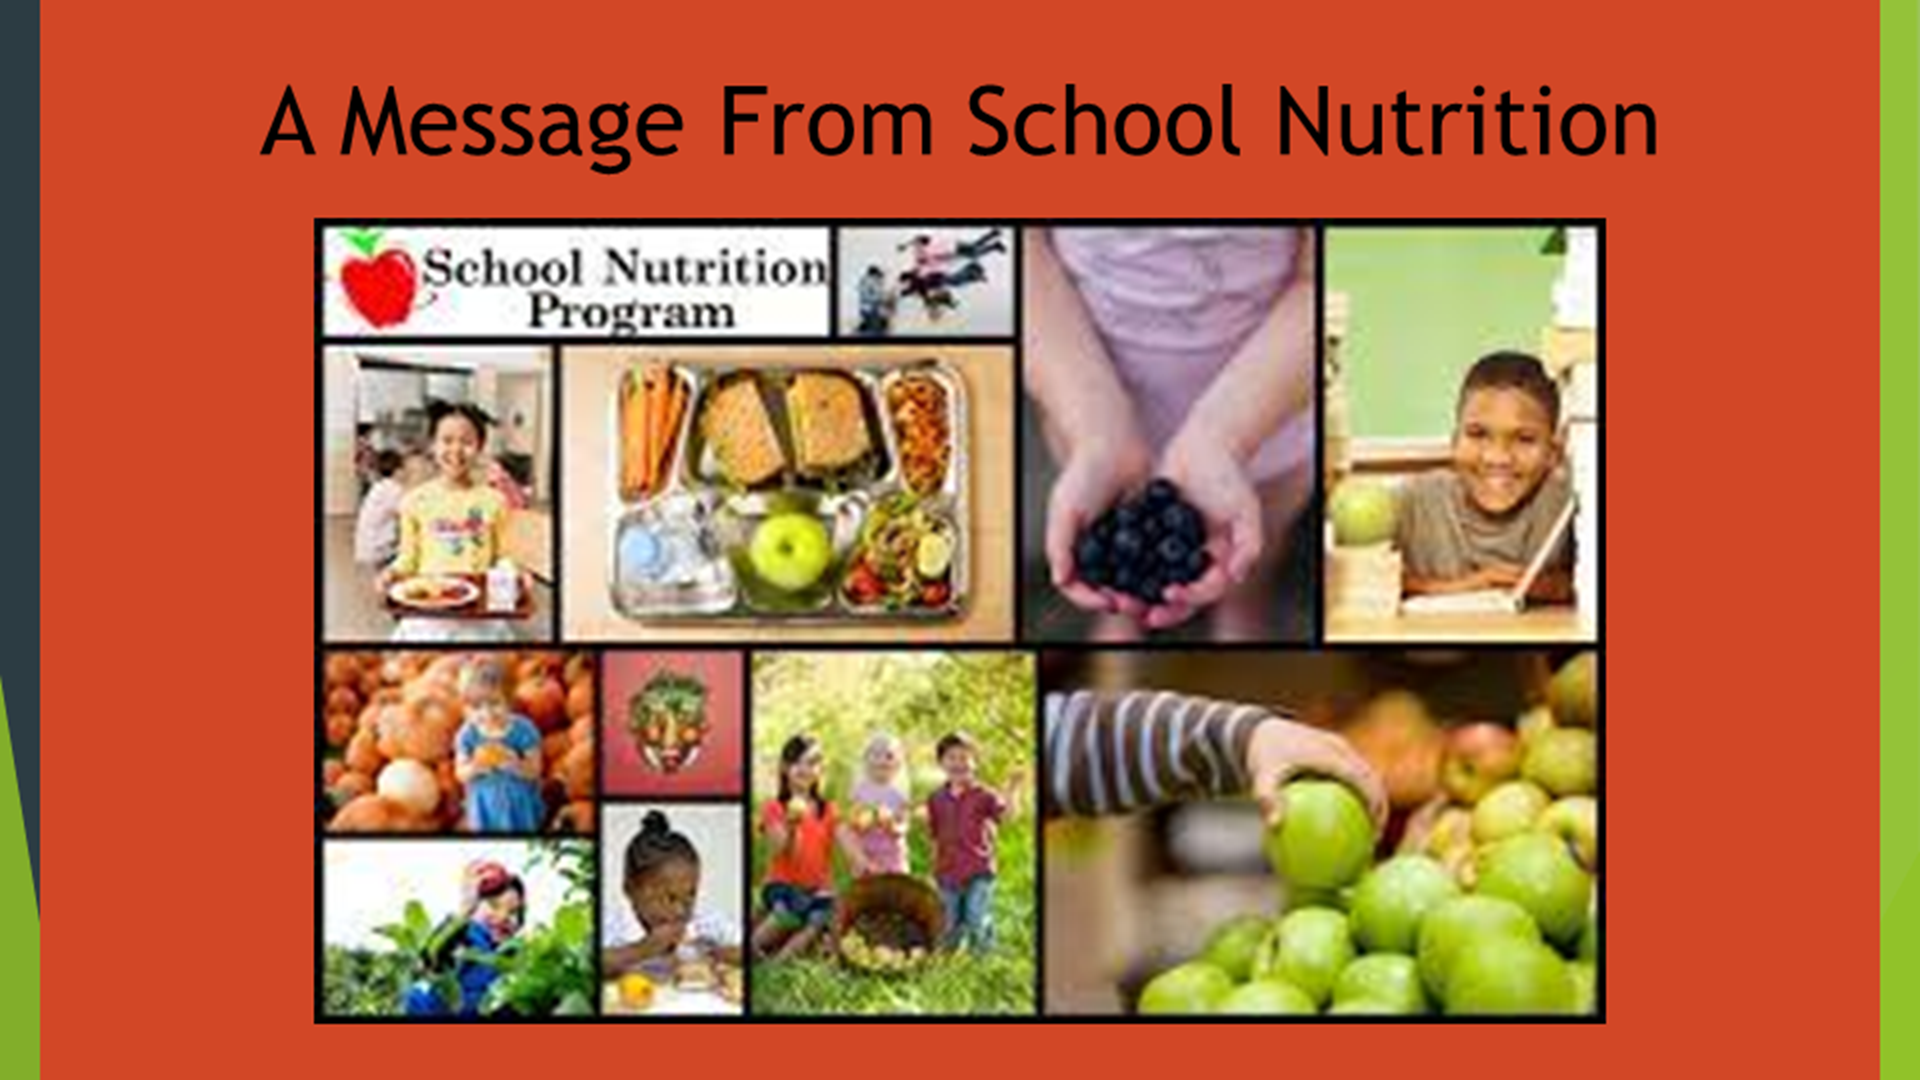 A Message From School Nutrition